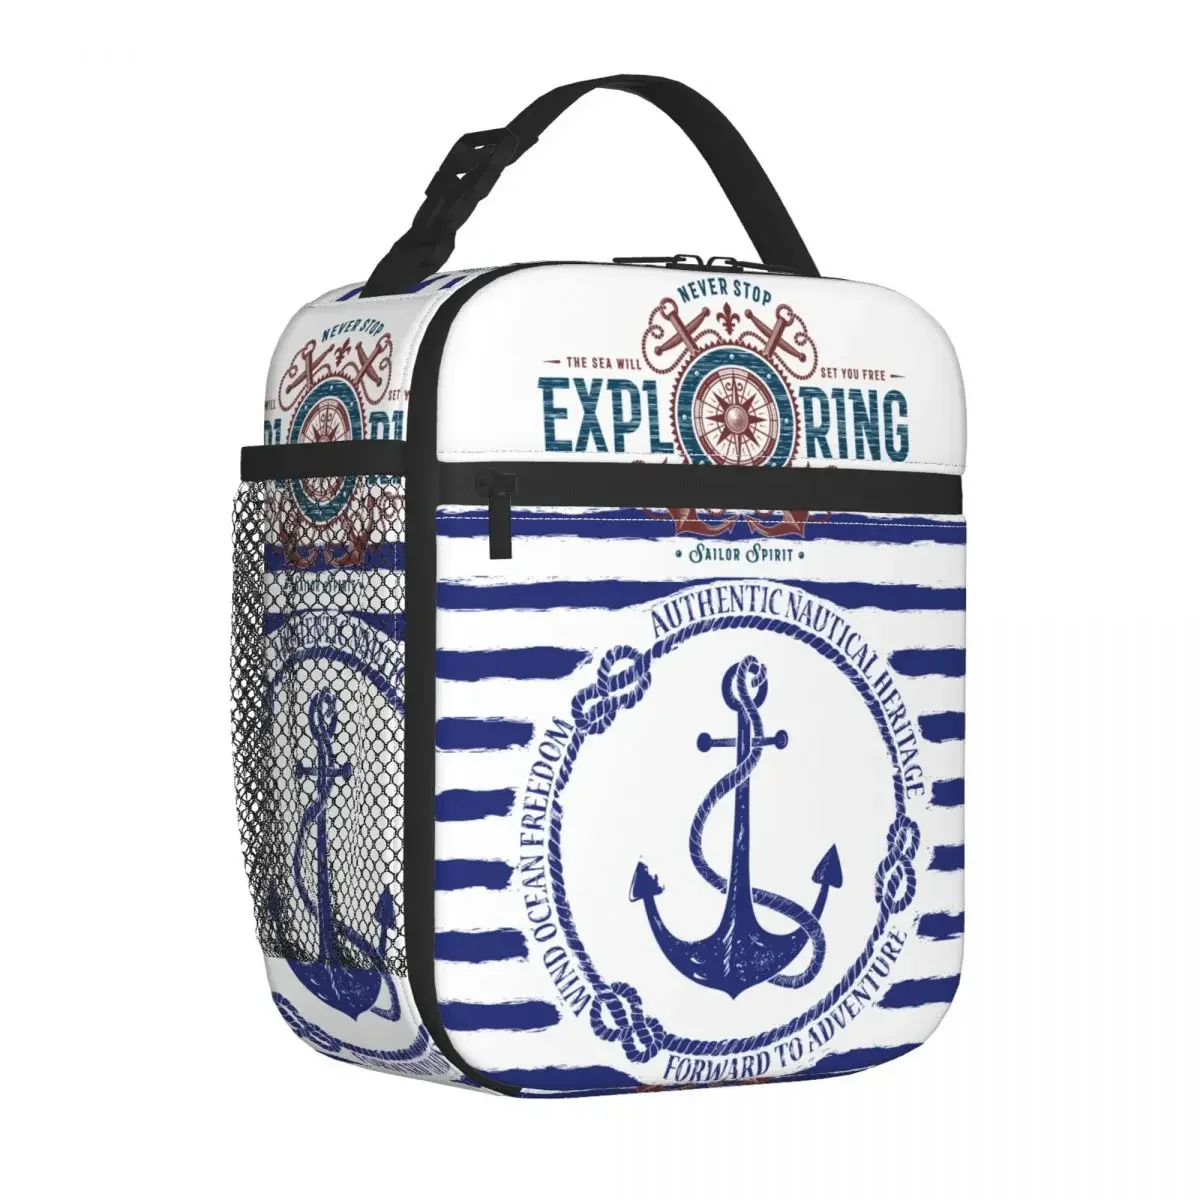 

Vintage Sailor Sea Exploring Anchor Accessories Insulated Lunch Bags Compass Anchors Unique Design Thermal Cooler Food Bento Box